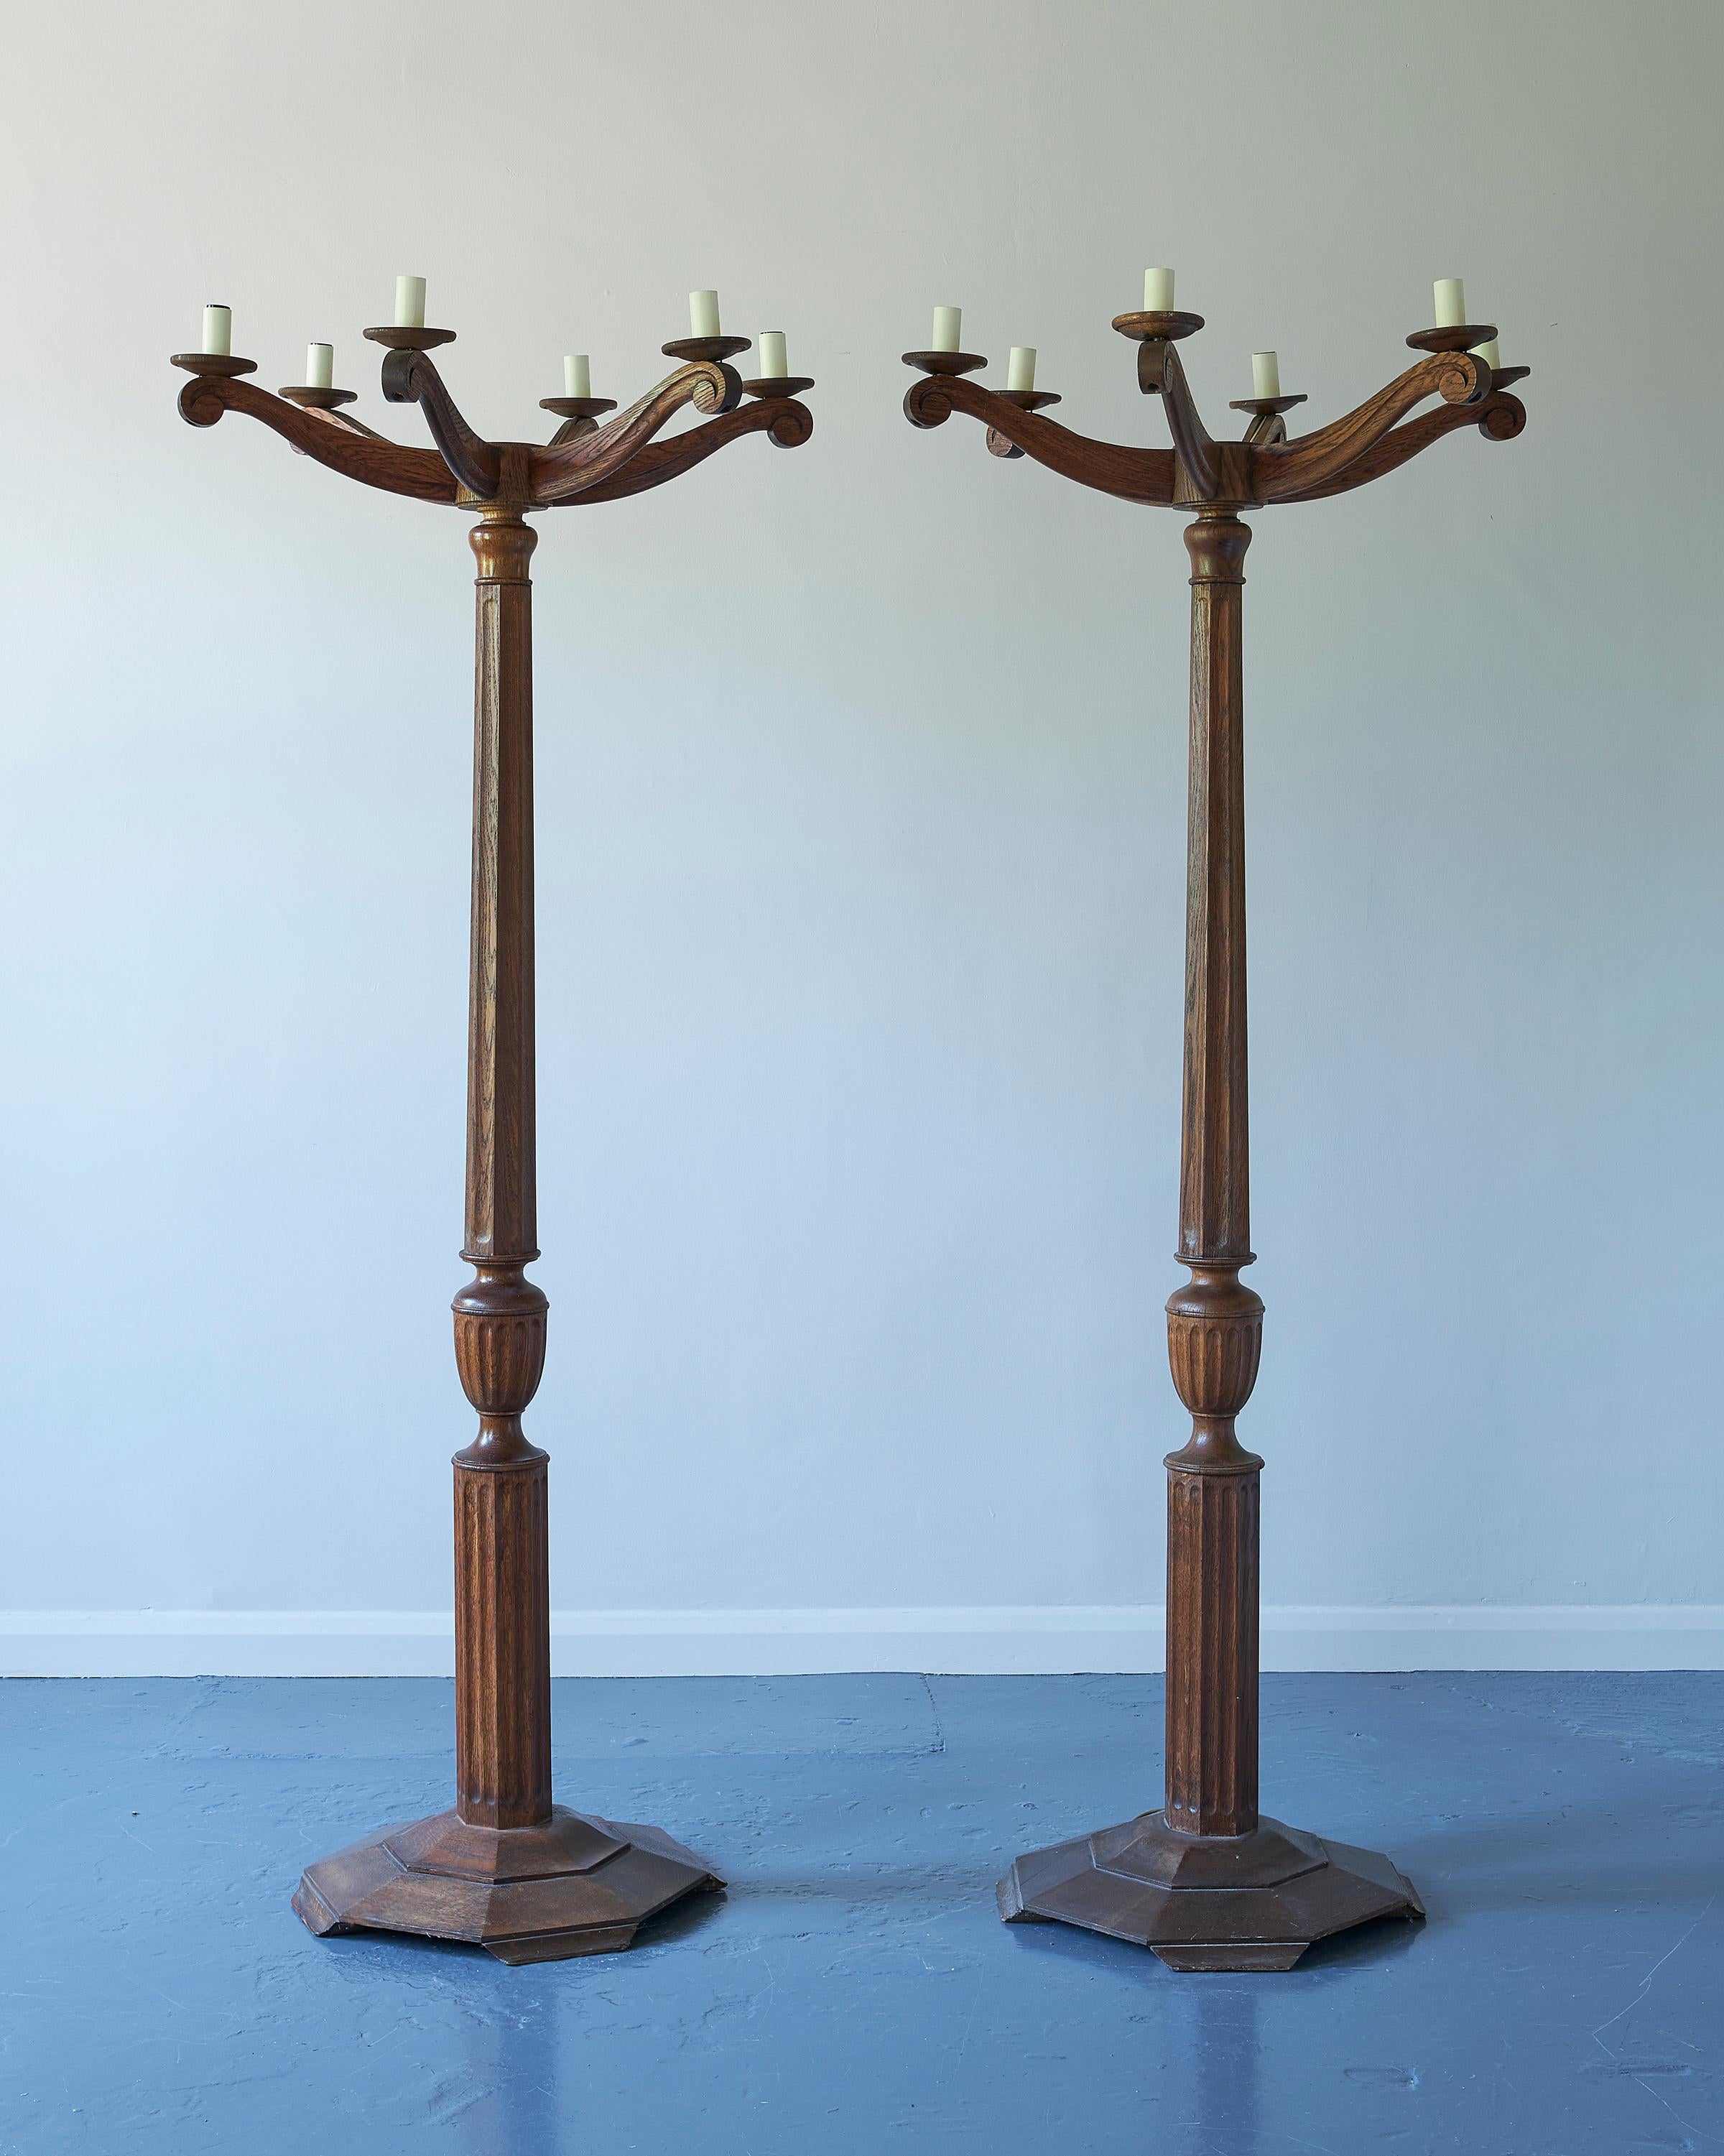 A matching pair of Art & Crafts candelabra floor lamps, early 20th century, solid oak, each with six arms and sconces, the reeded shaft with fluted baluster section, octagonal bases, electrified.